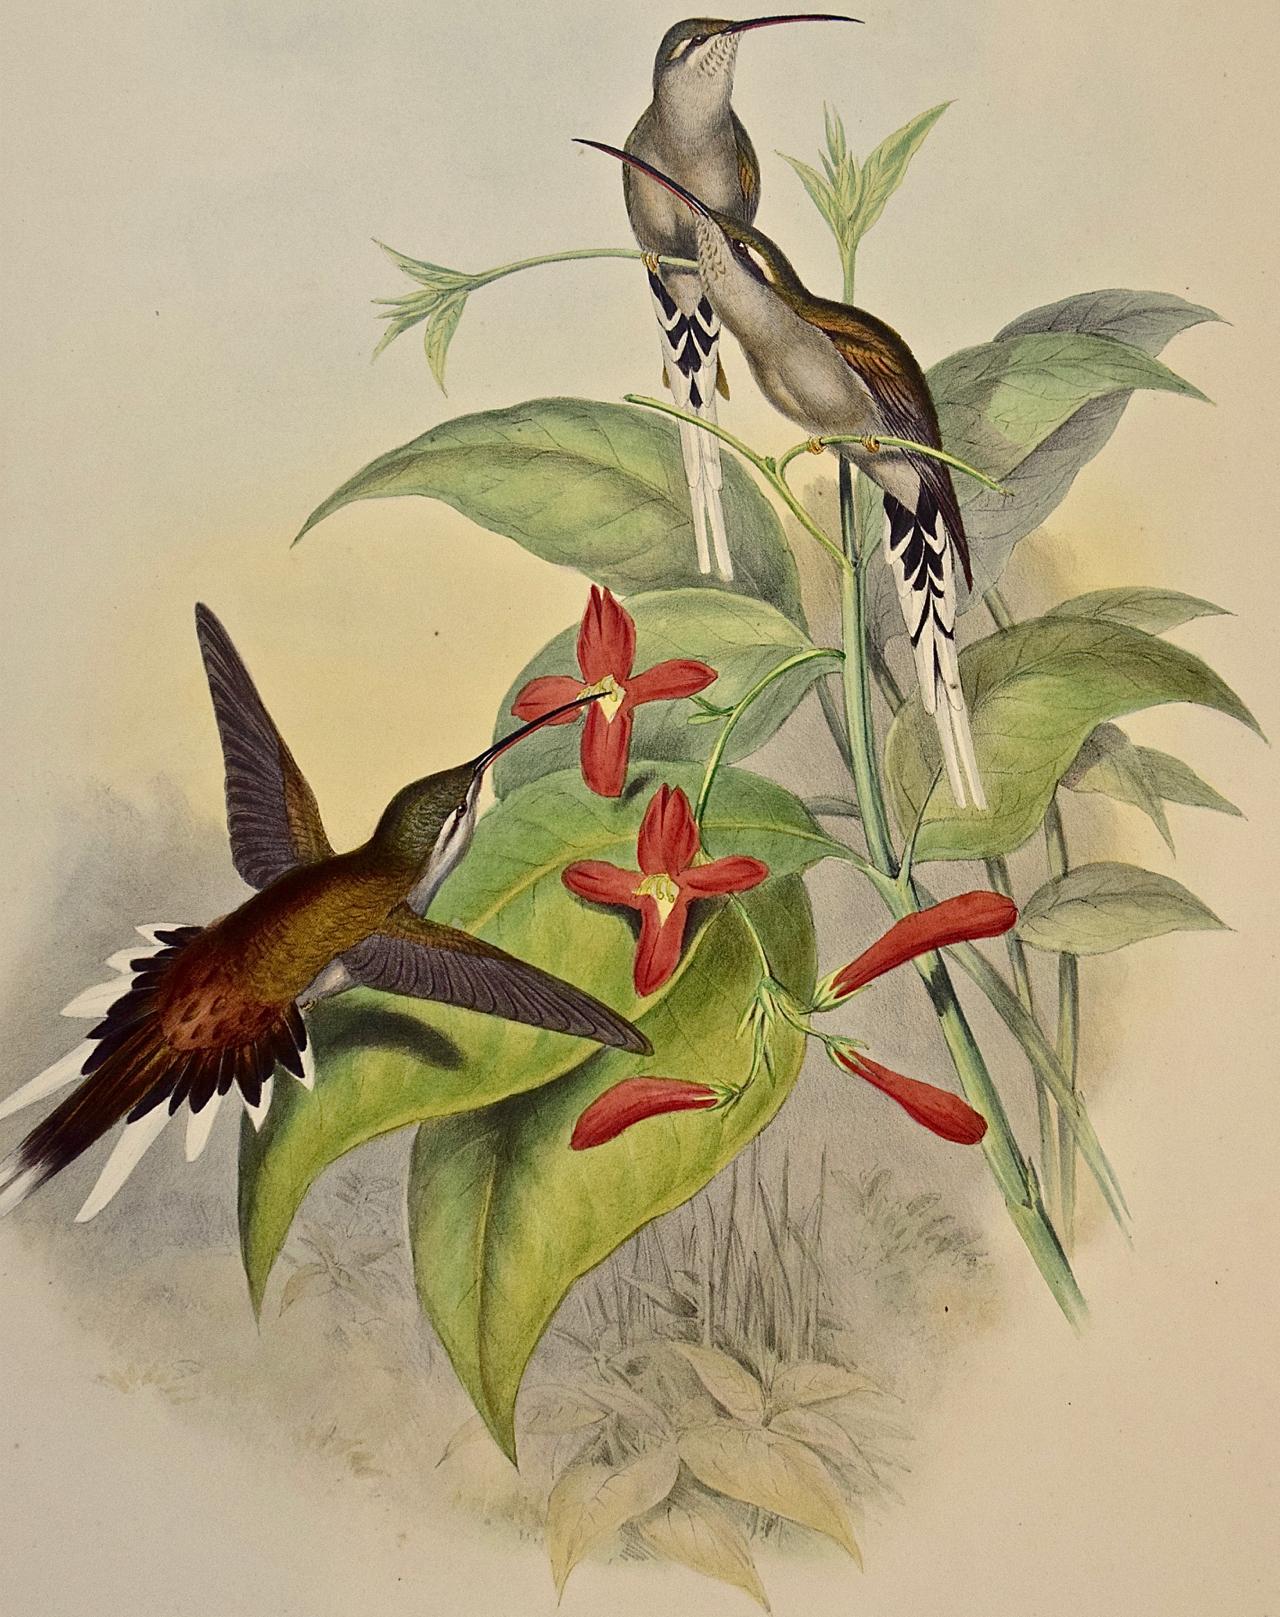 Salle's Hermit Hummingbirds: A 19th C. Gould Hand-colored 